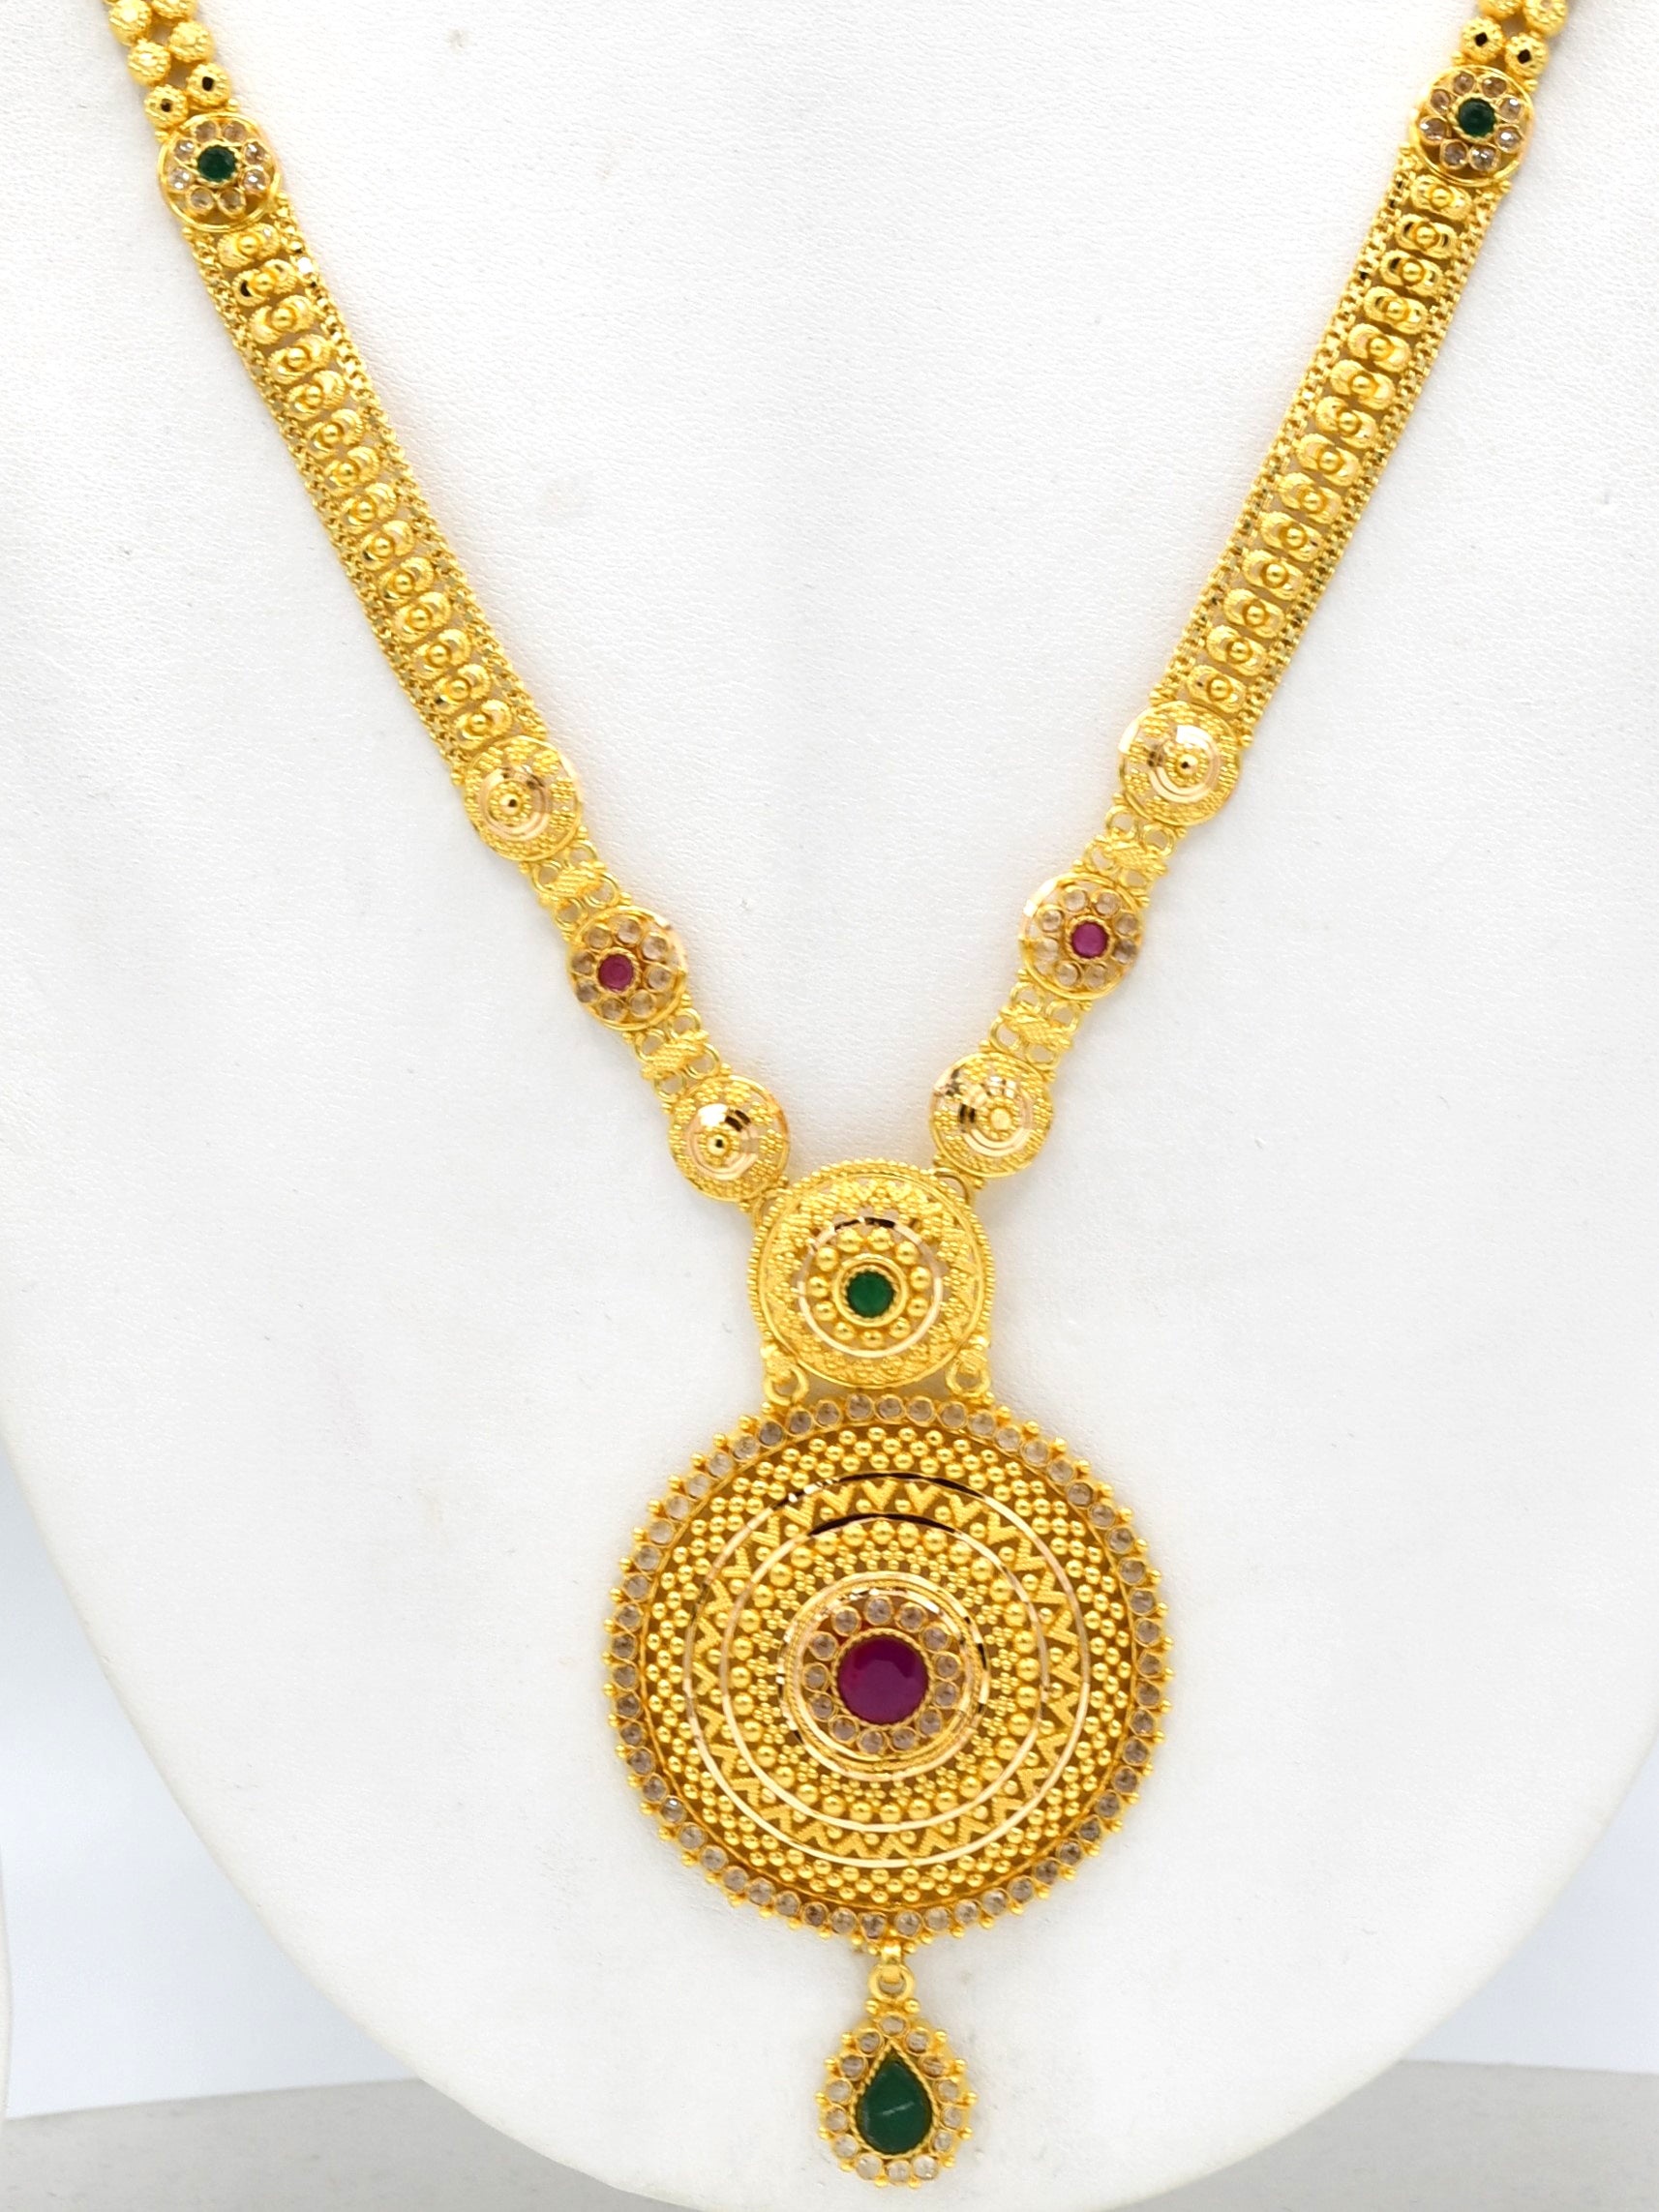 22ct Gold Multi CZ Long Necklace Set - Roop Darshan